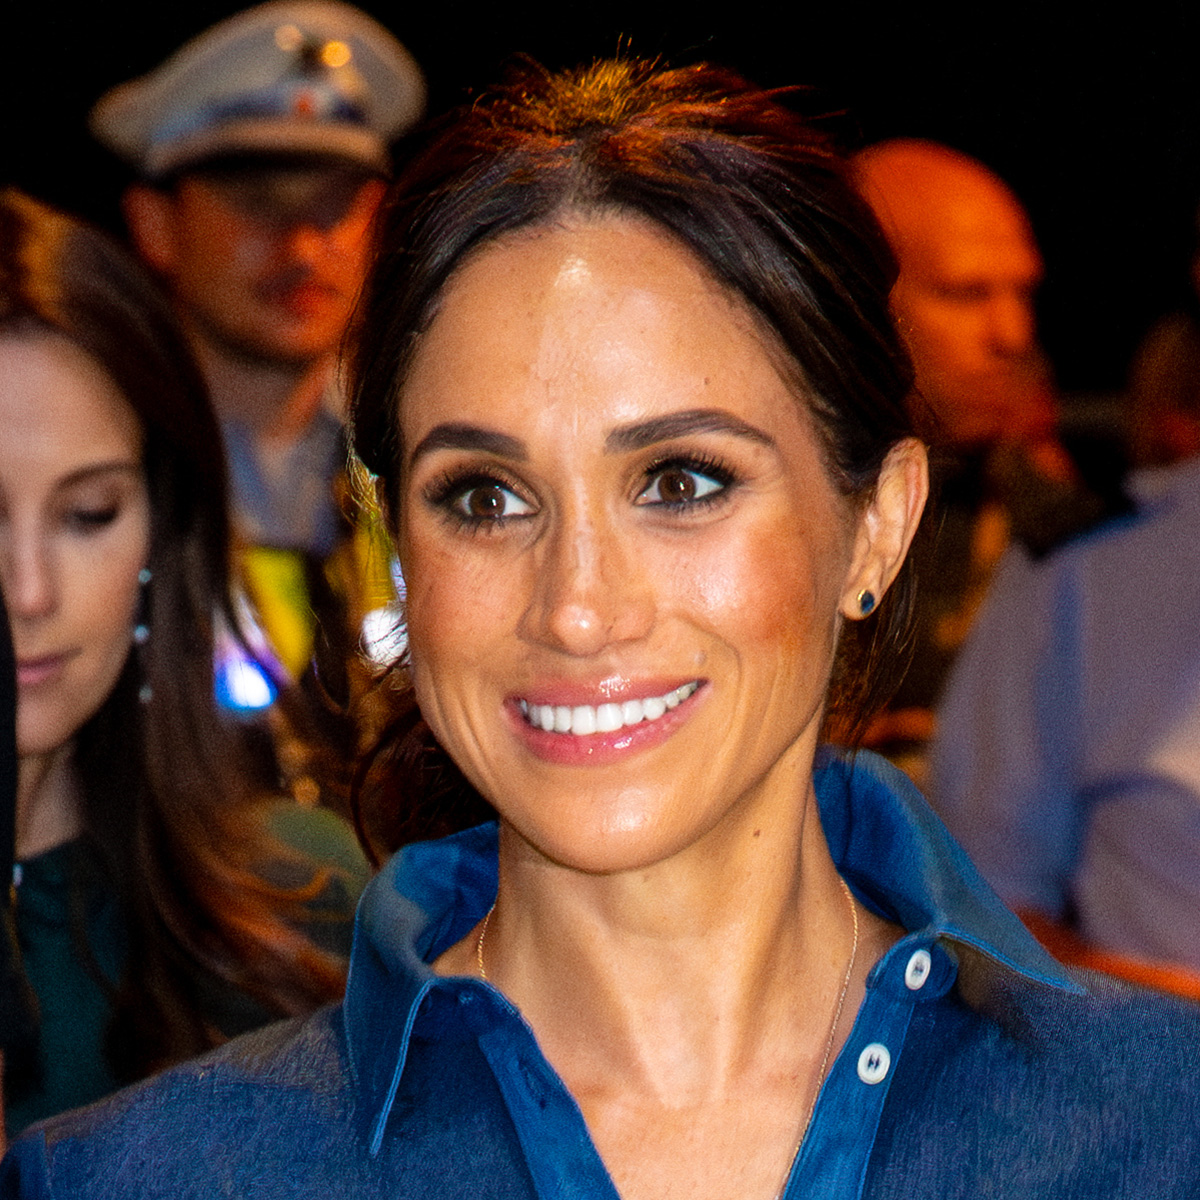 Meghan Markle Wore These Stylish White Jeans For Prince Harry's